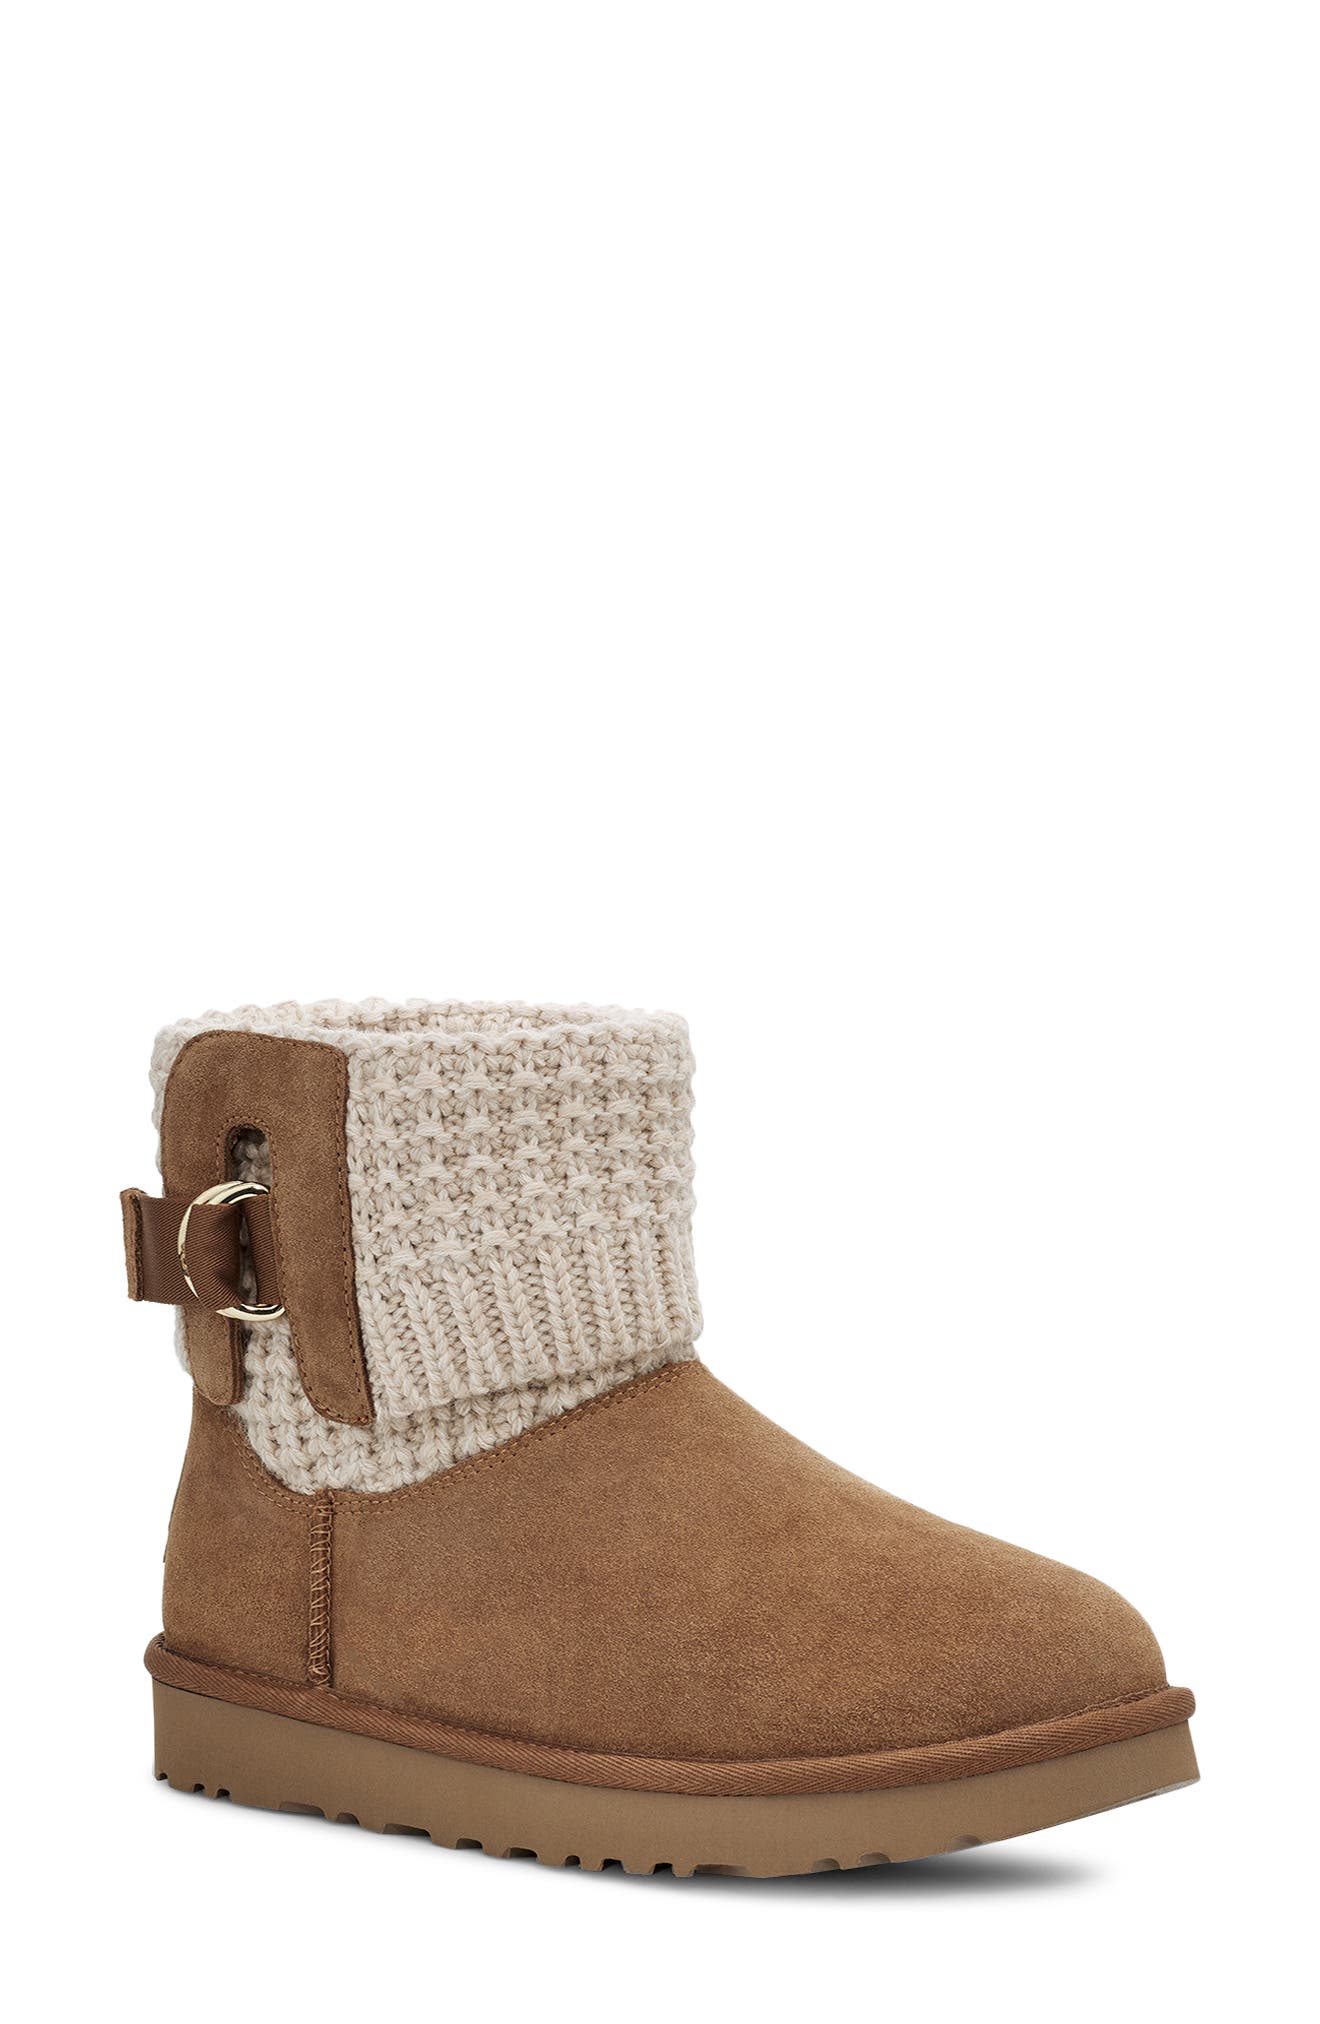 rivers ugg boots $12